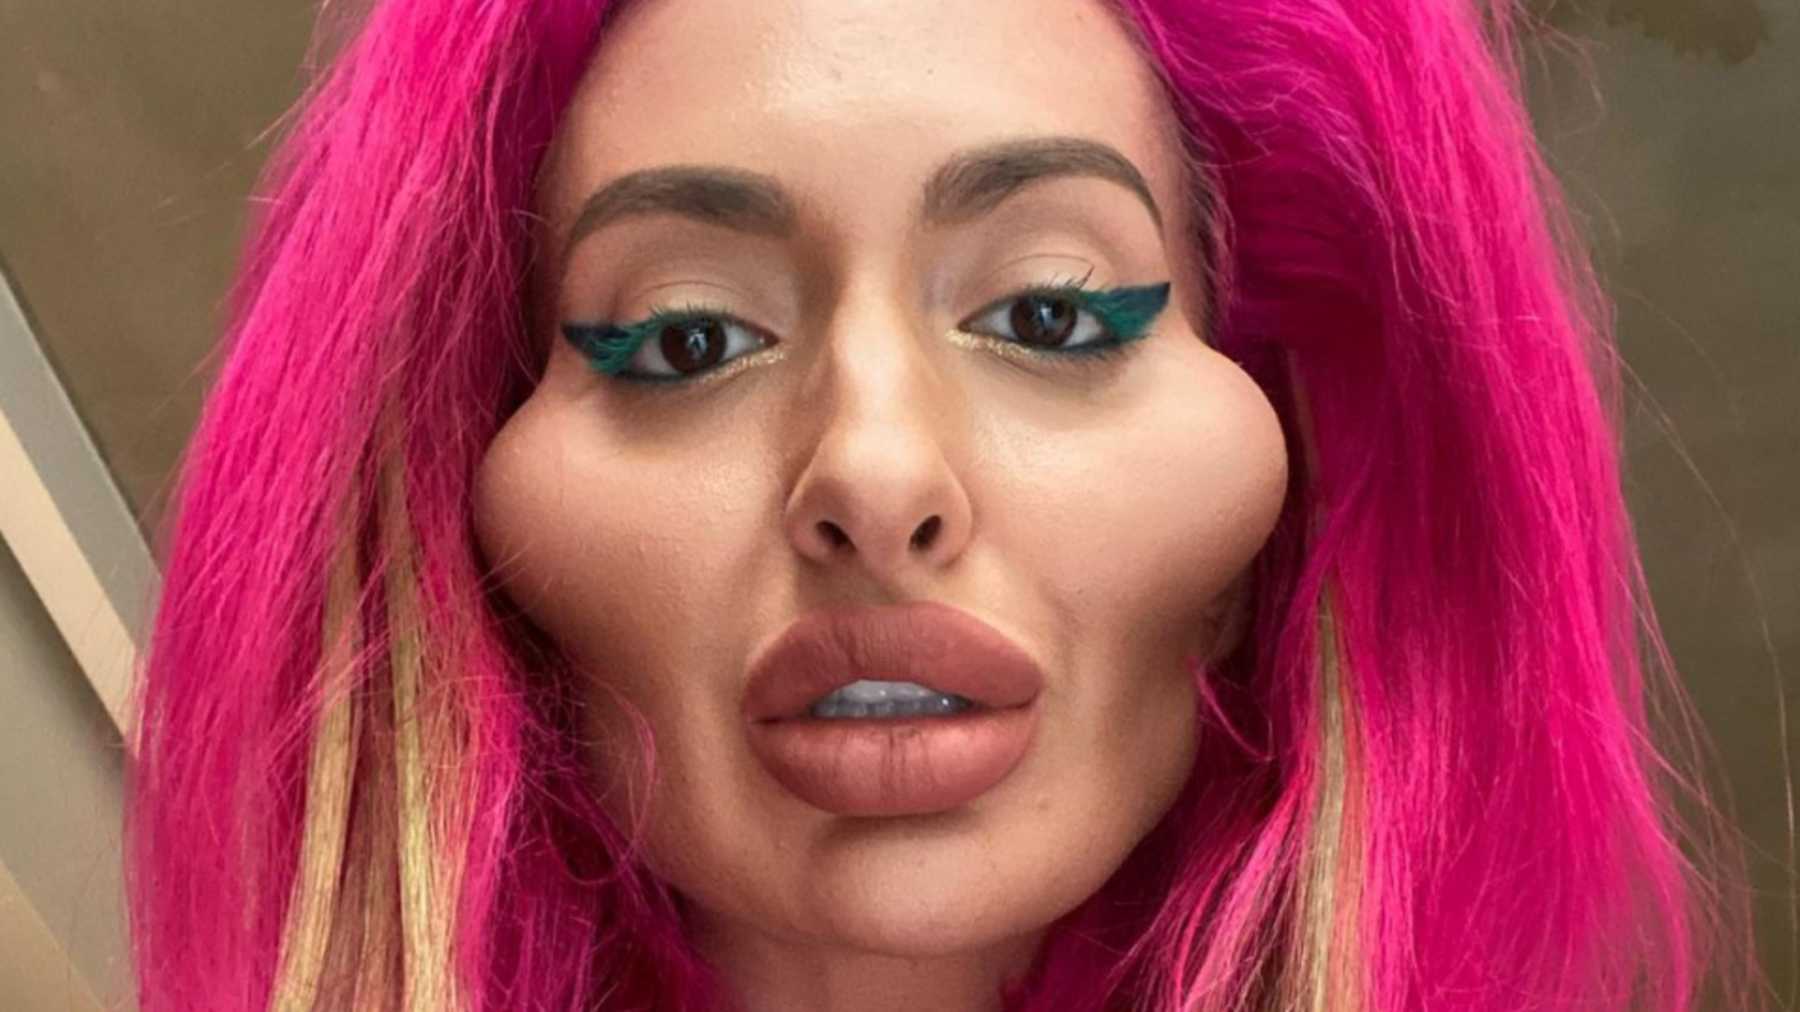 All About Ig Model Who Is Addicted To Cheek Fillers And Has Biggest Cheeks In The World